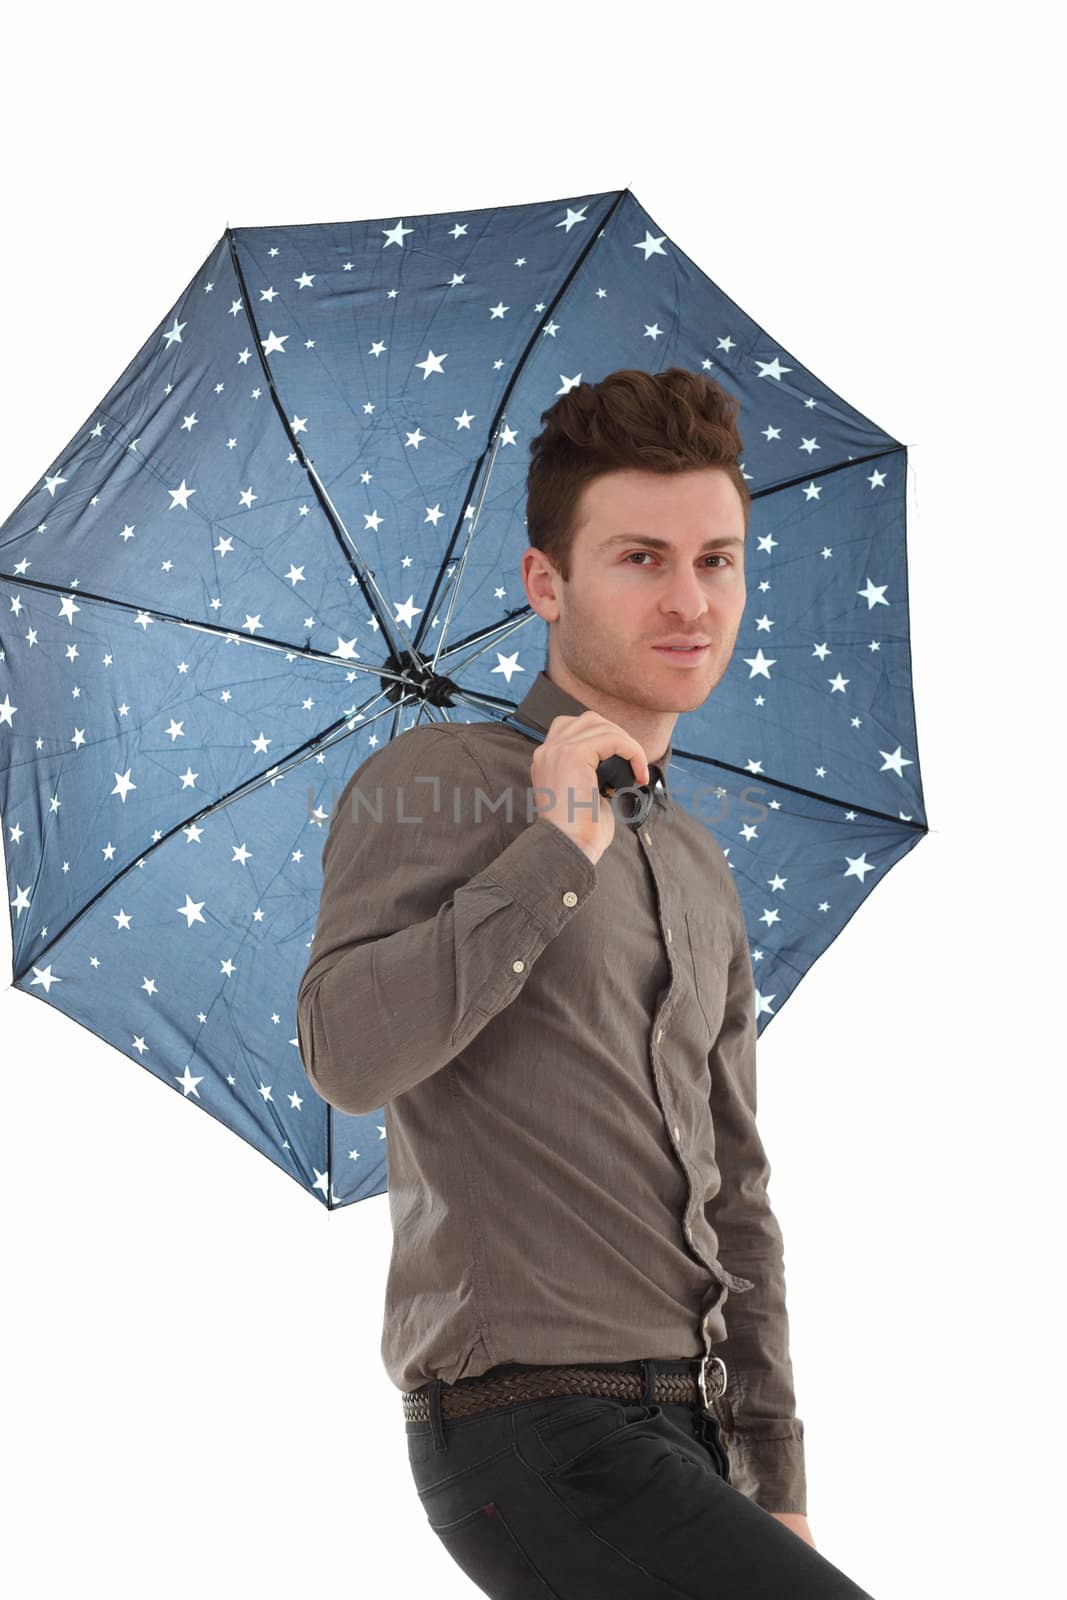 Handsome man with an umbrella by shamtor